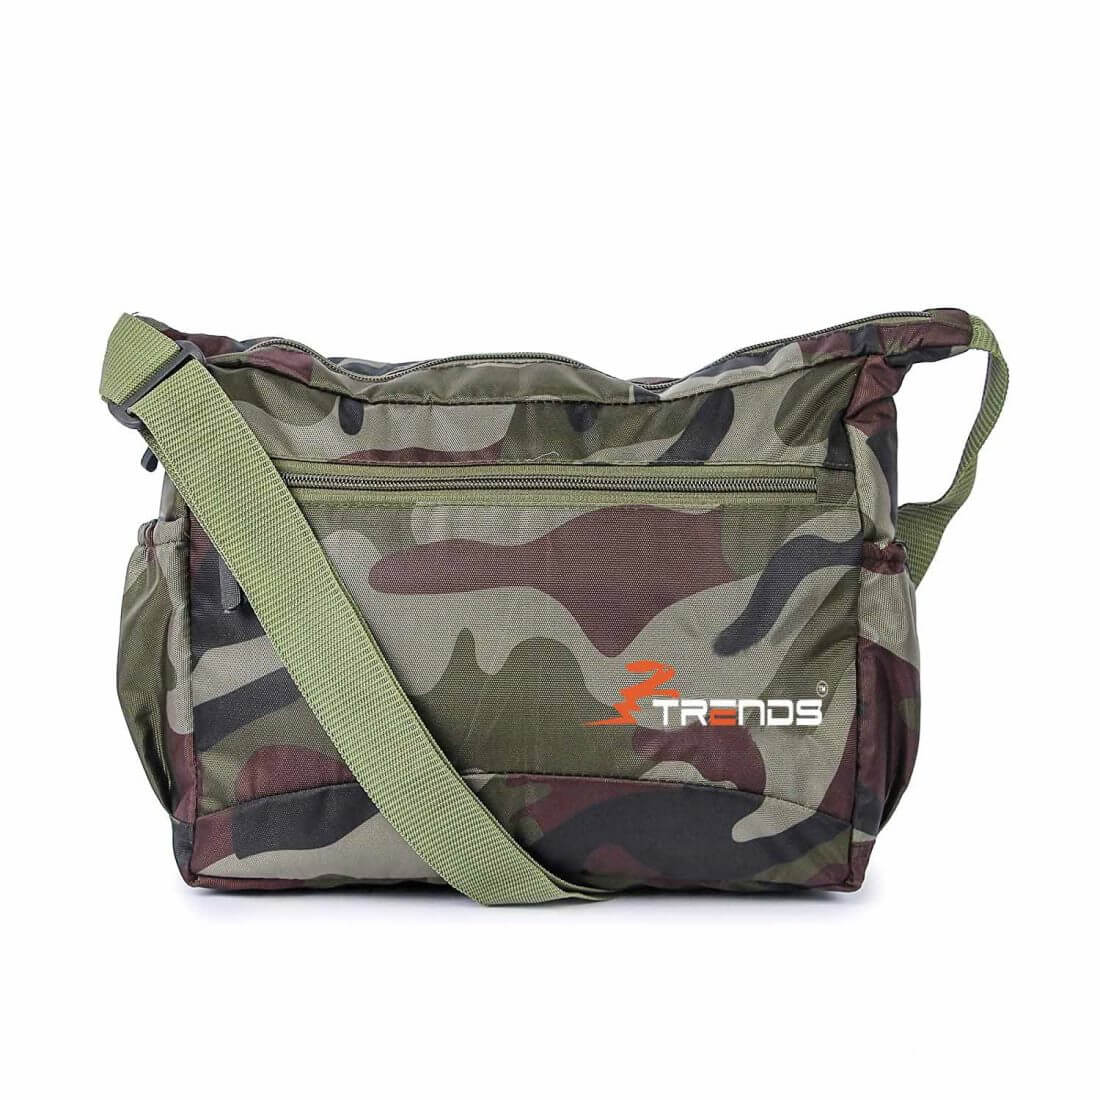 trends camouflage sling bag with green shoulder strap and green zipper in front, model no - 405, front view